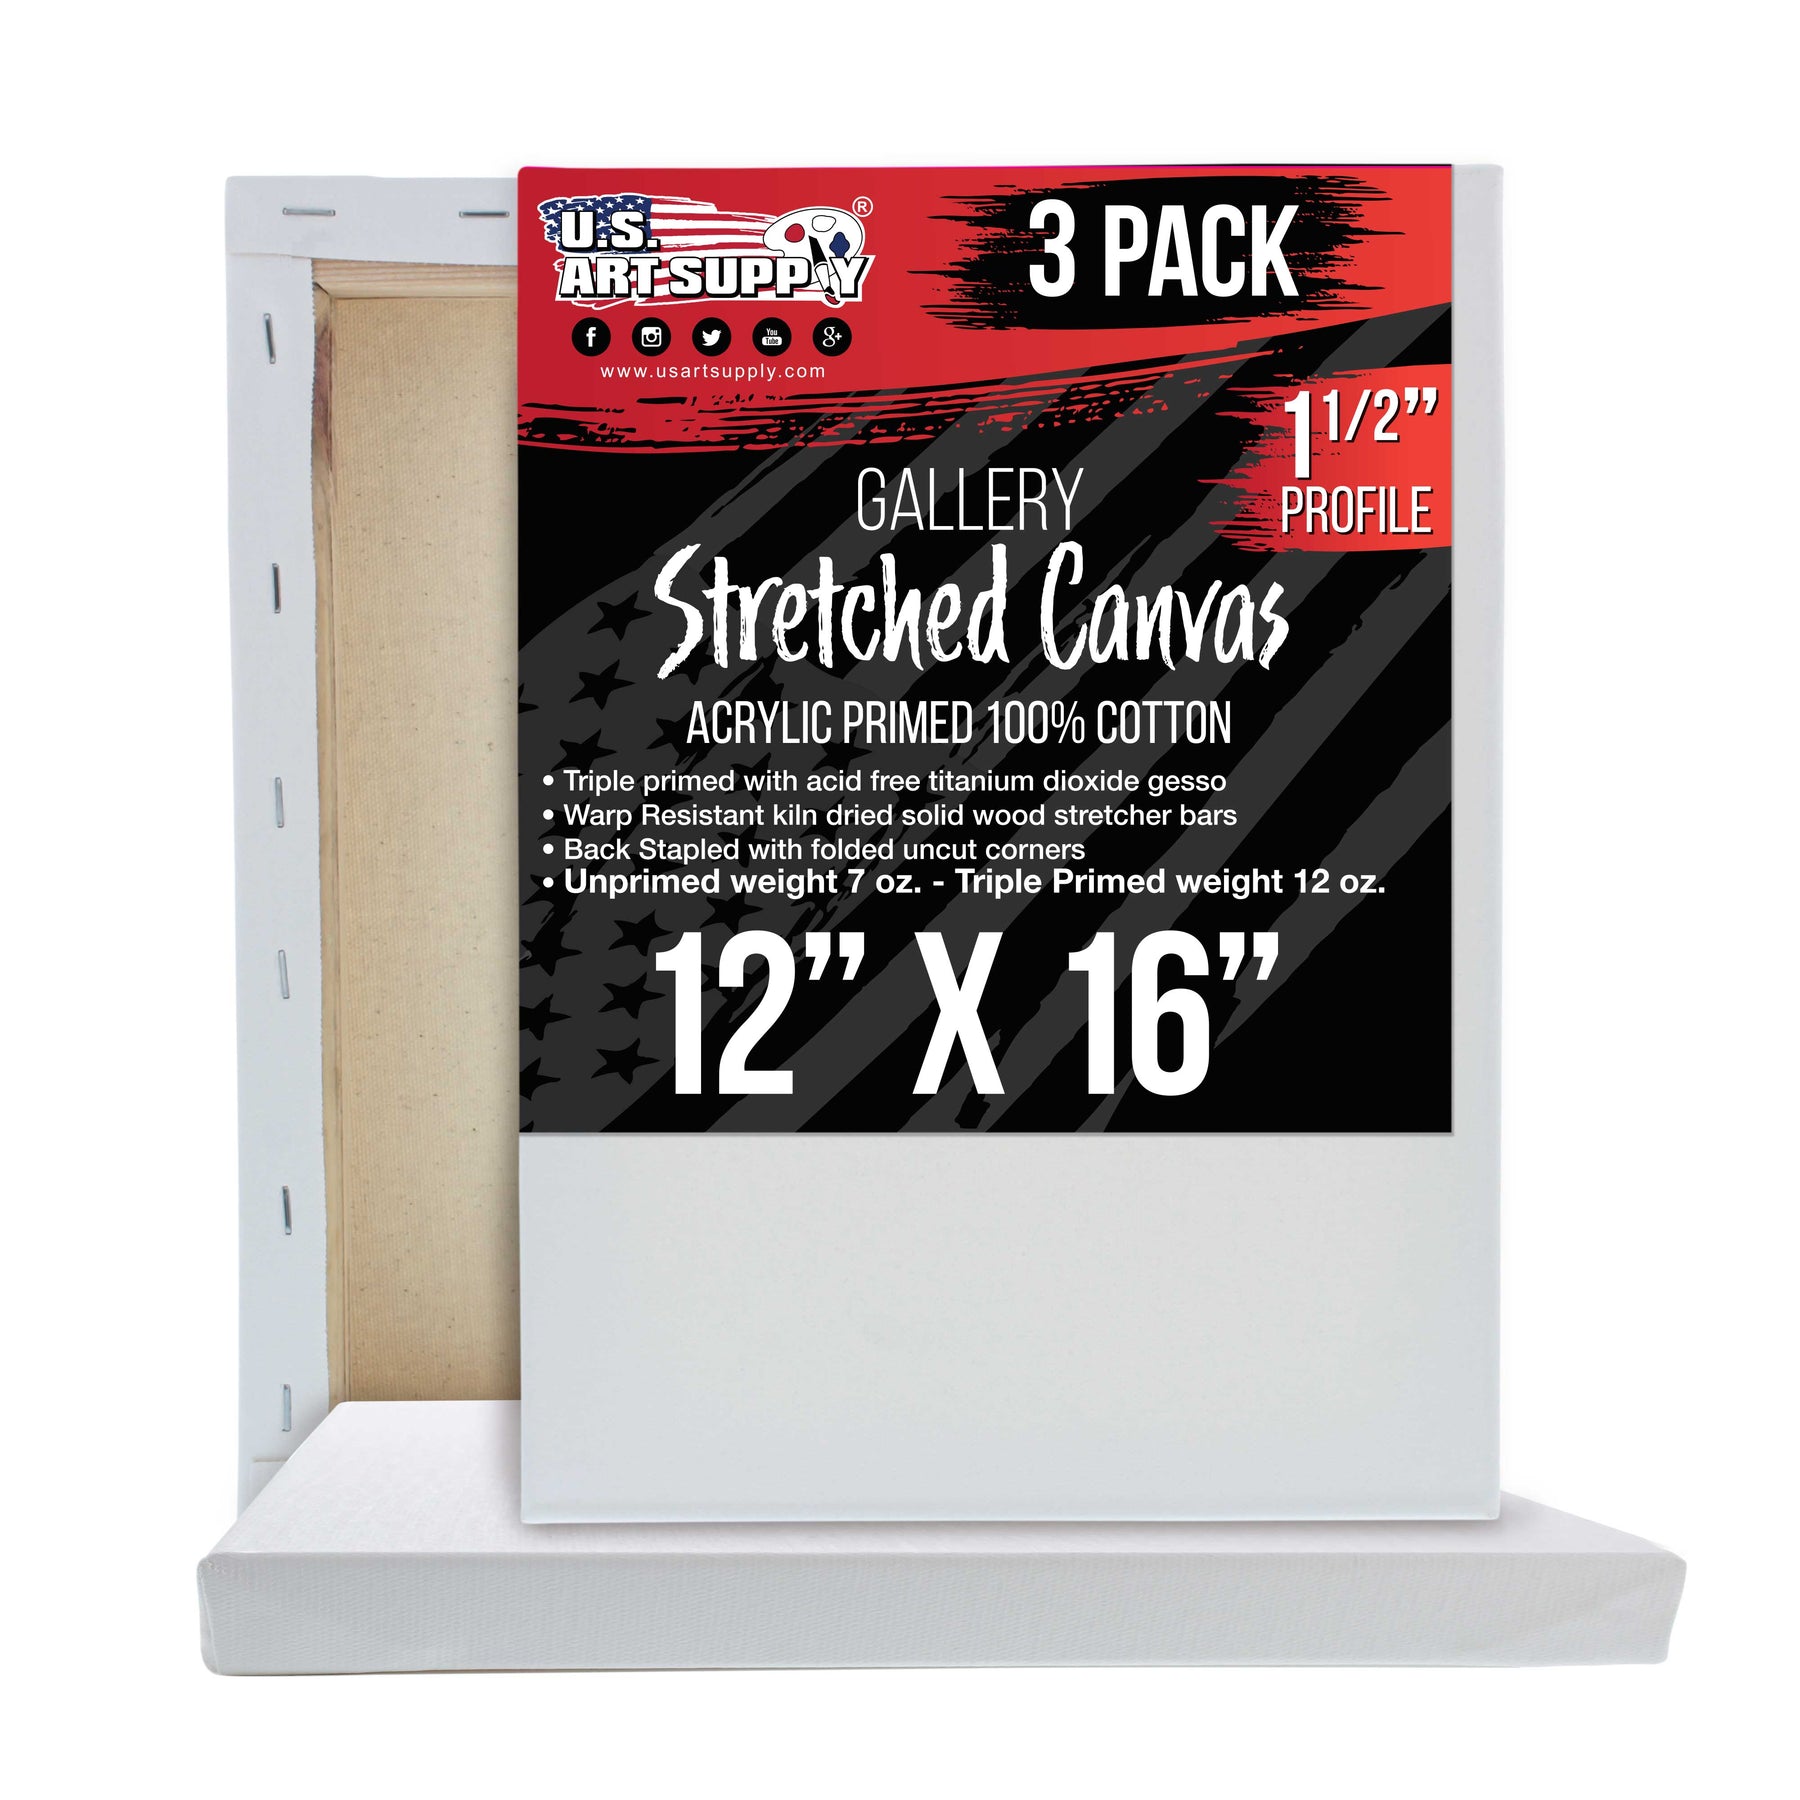 9 x 12 Professional Artist Quality Acid Free Canvas Panel Boards for  Painting 12-Pack